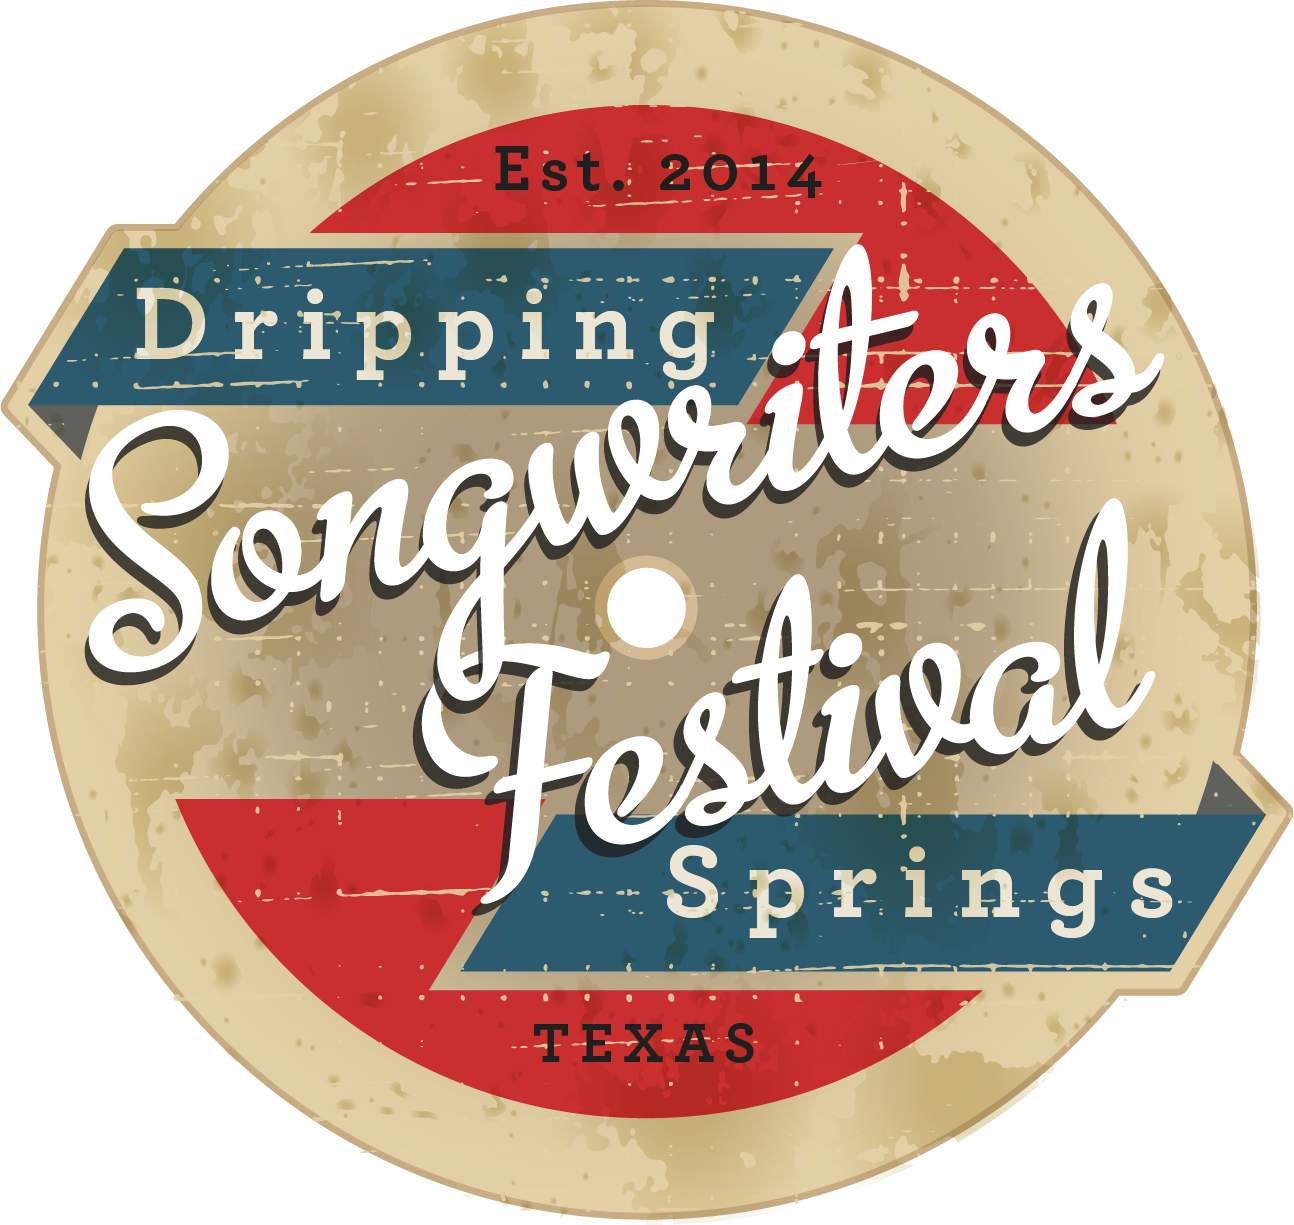 Find Out More About the Dripping Springs Songwriters Festival